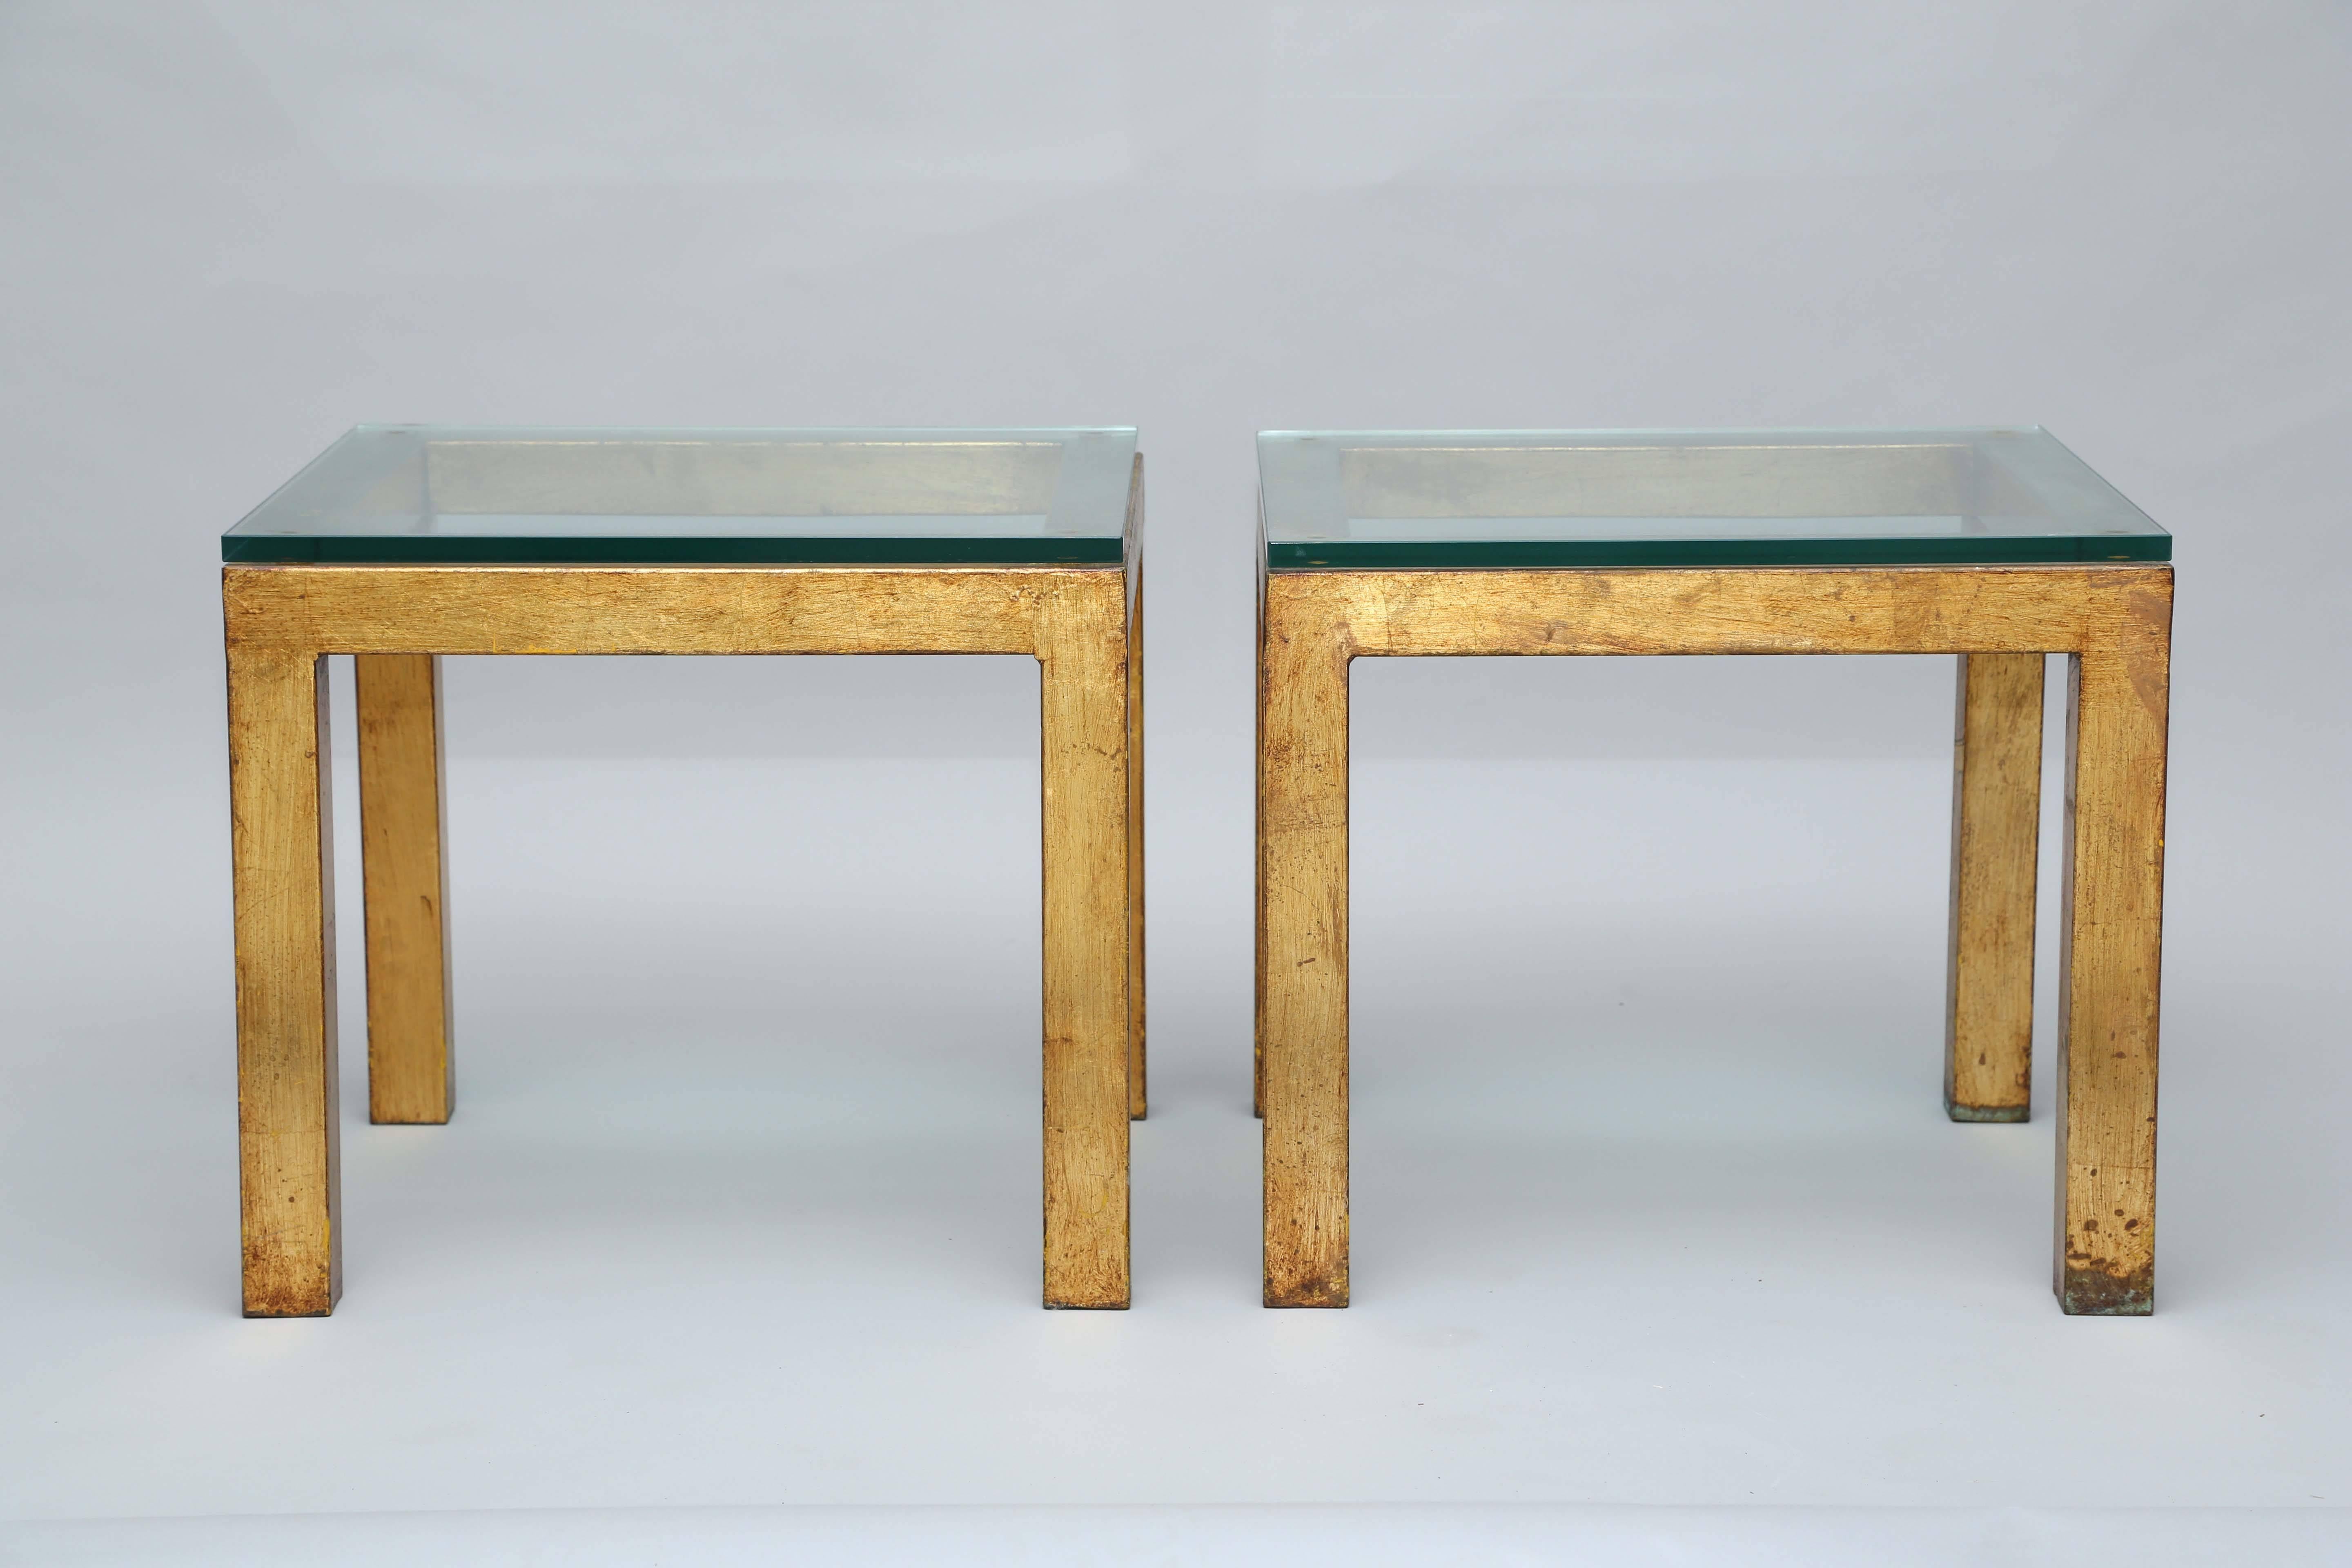 Pair of side tables, in the modernist Parsons form, of metal with gilded finish, having a glass top.

Stock ID: D9328